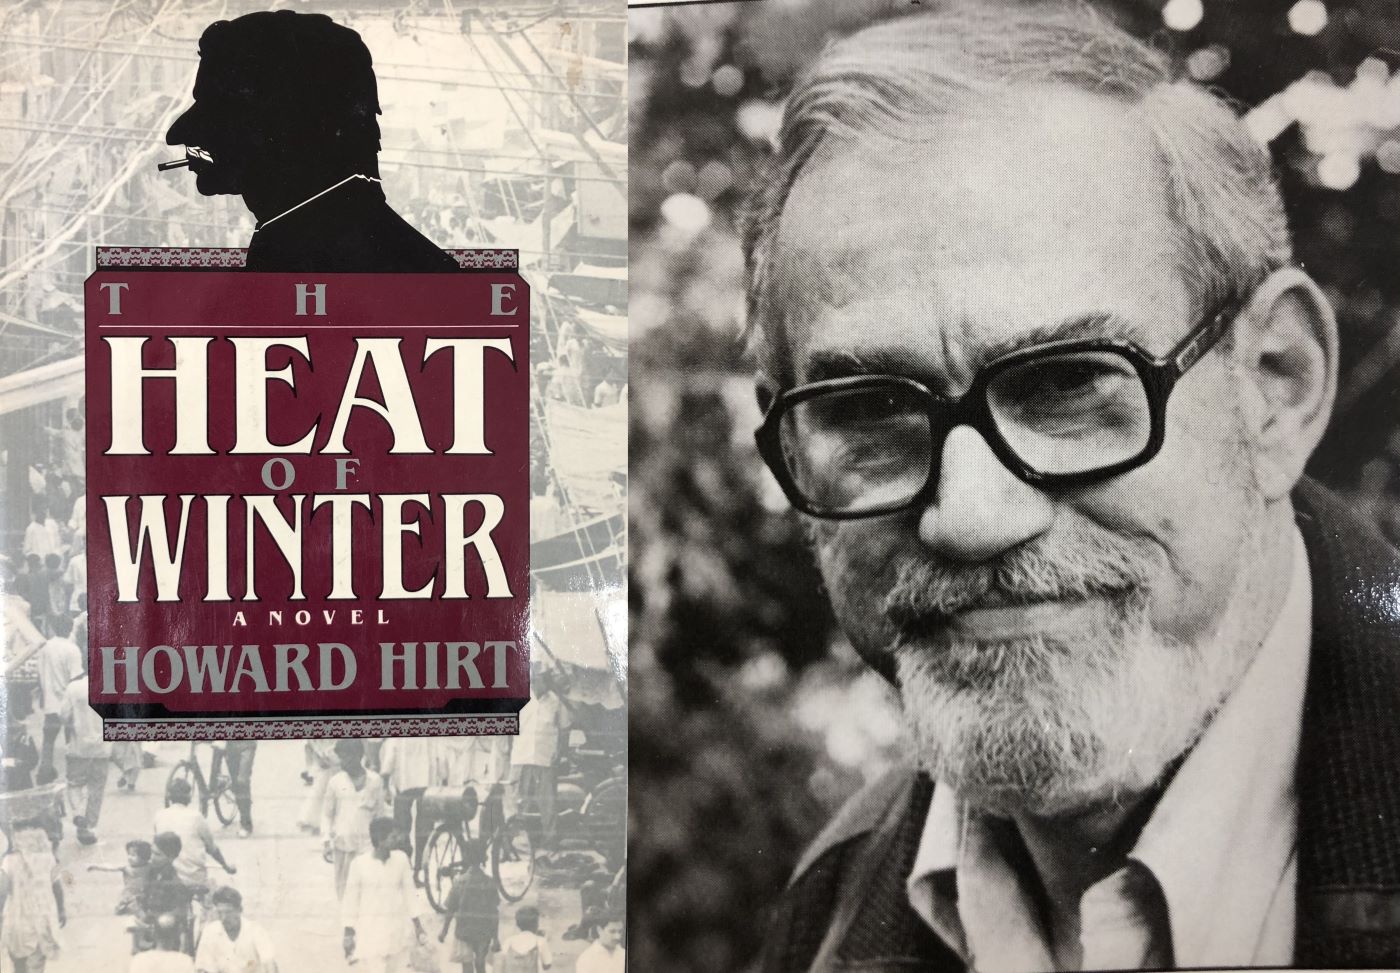 Nehru’s visit to Aligarh and a foiled assassination attempt: The stuff of Howard Hirt’s forgotten novel, The Heat of Winter